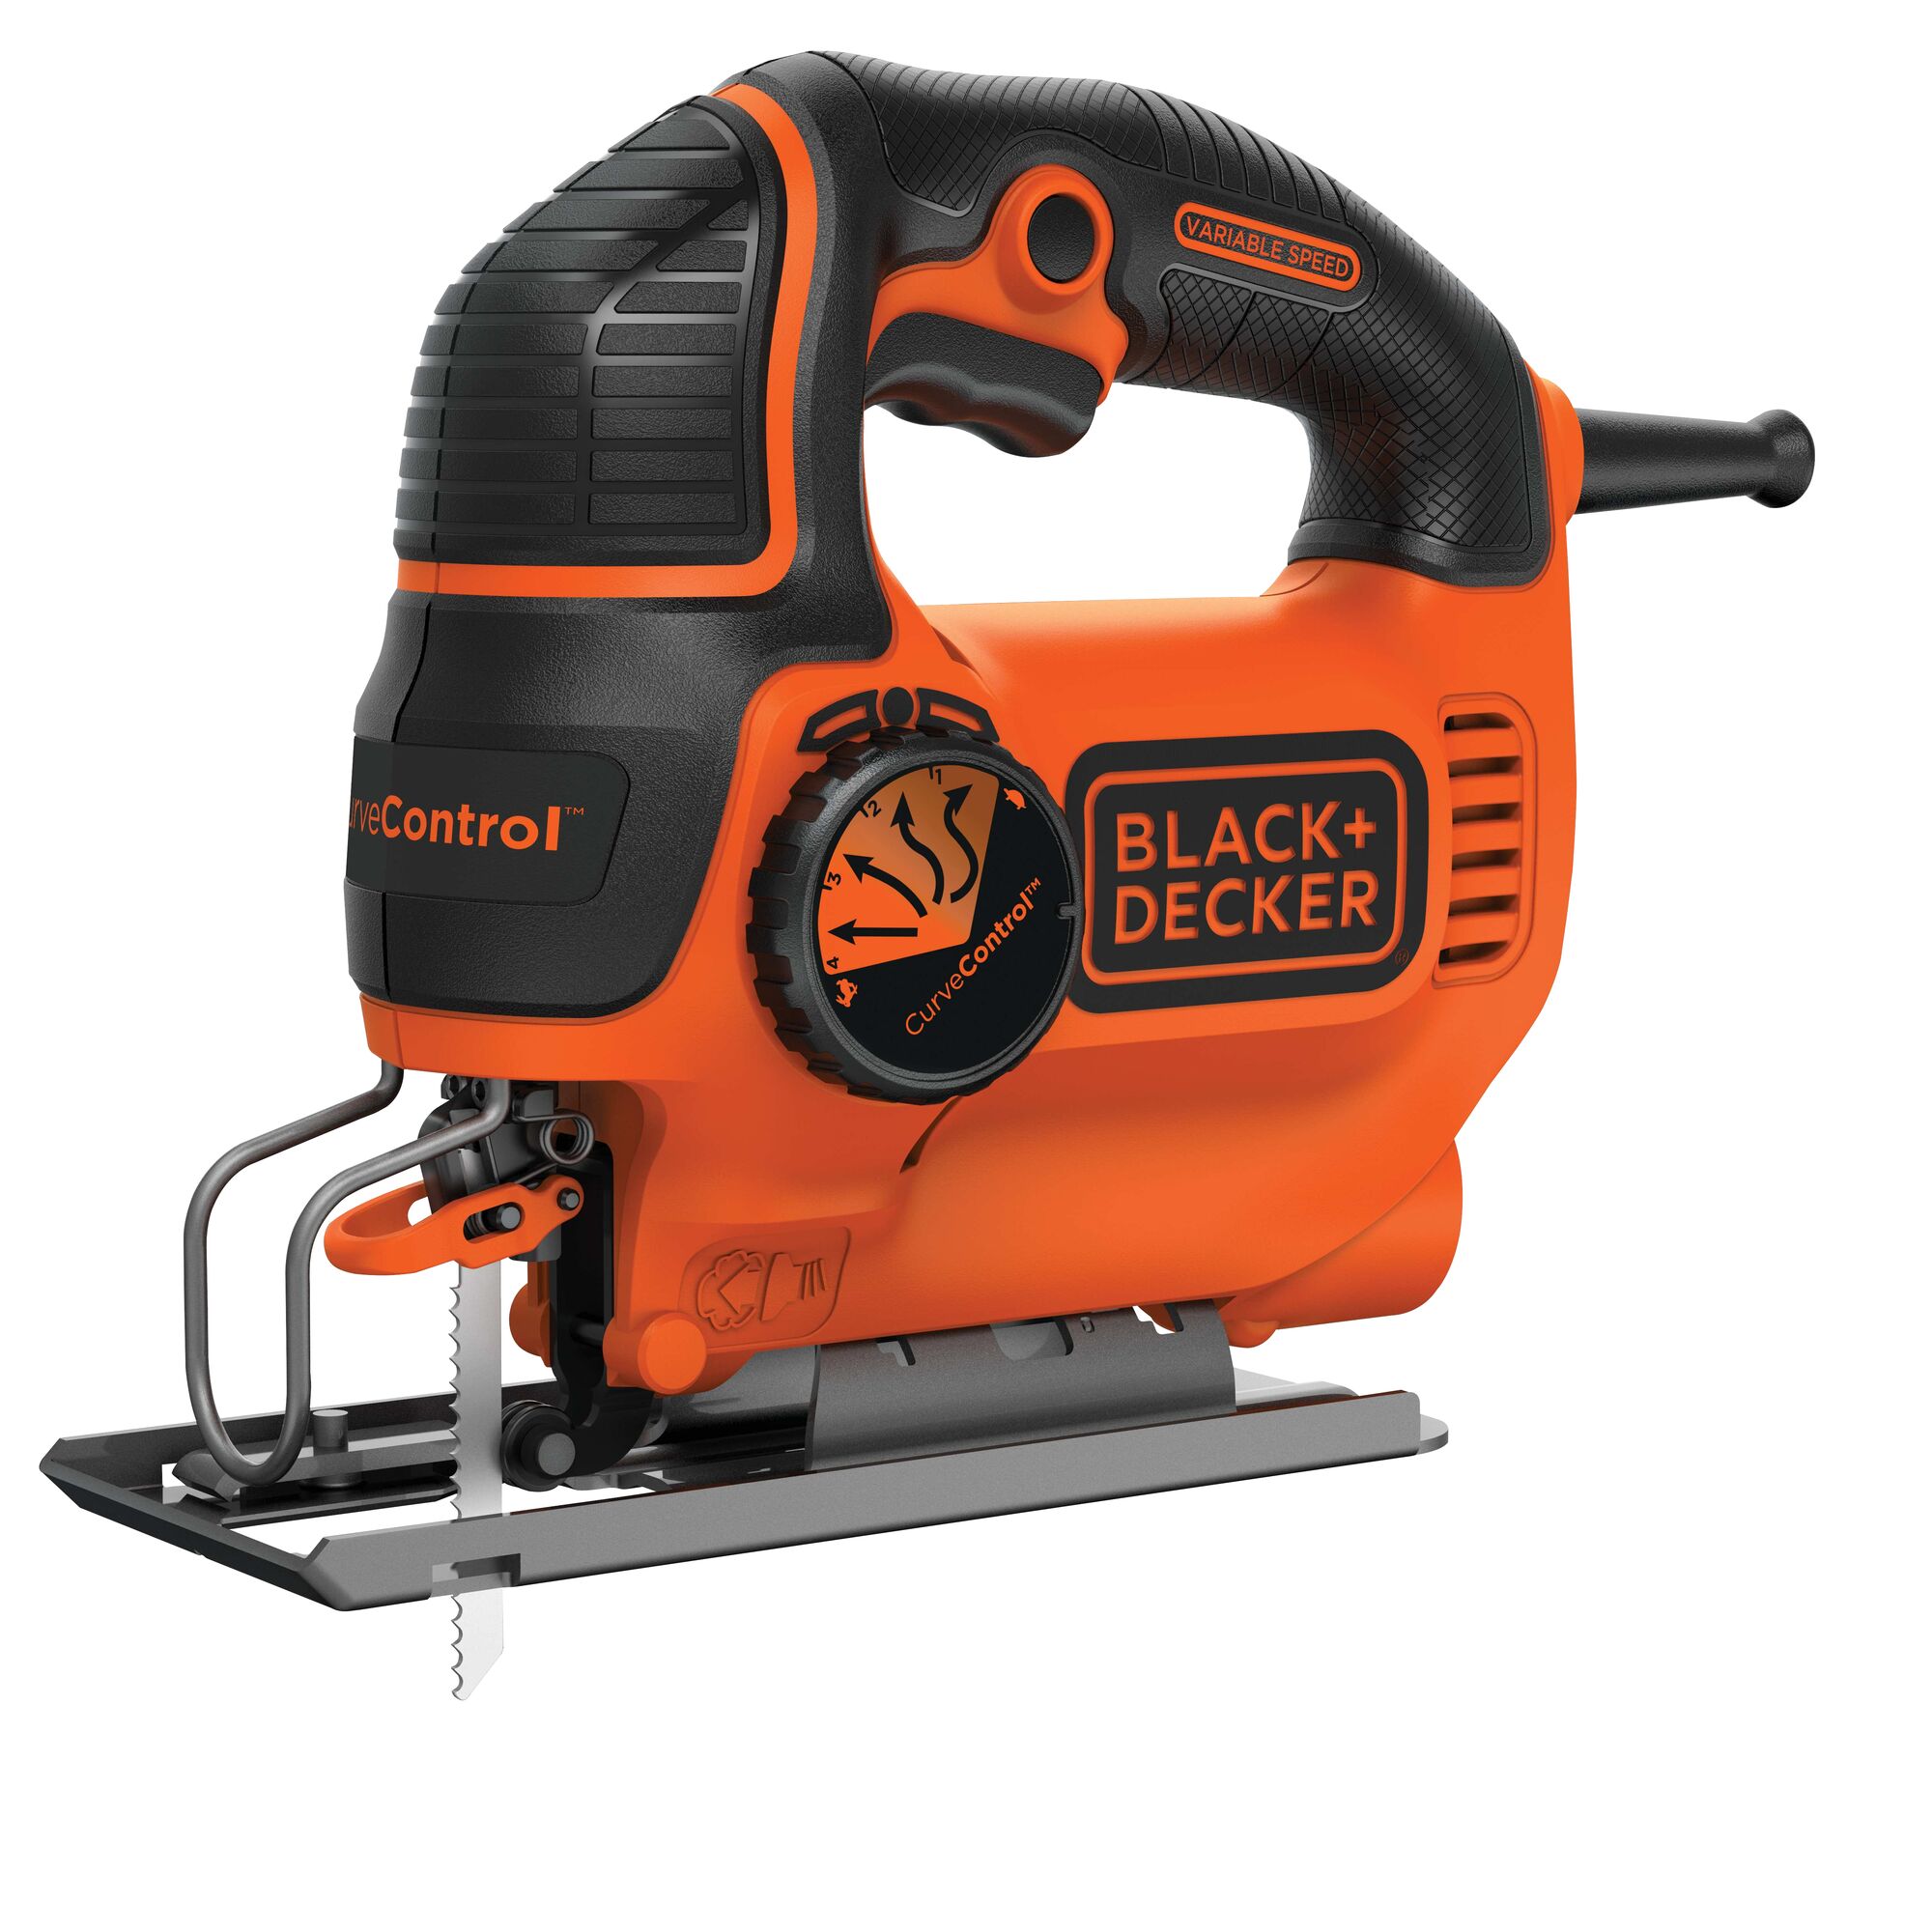 Profile of black and decker jig saw smart select 5 amperes.